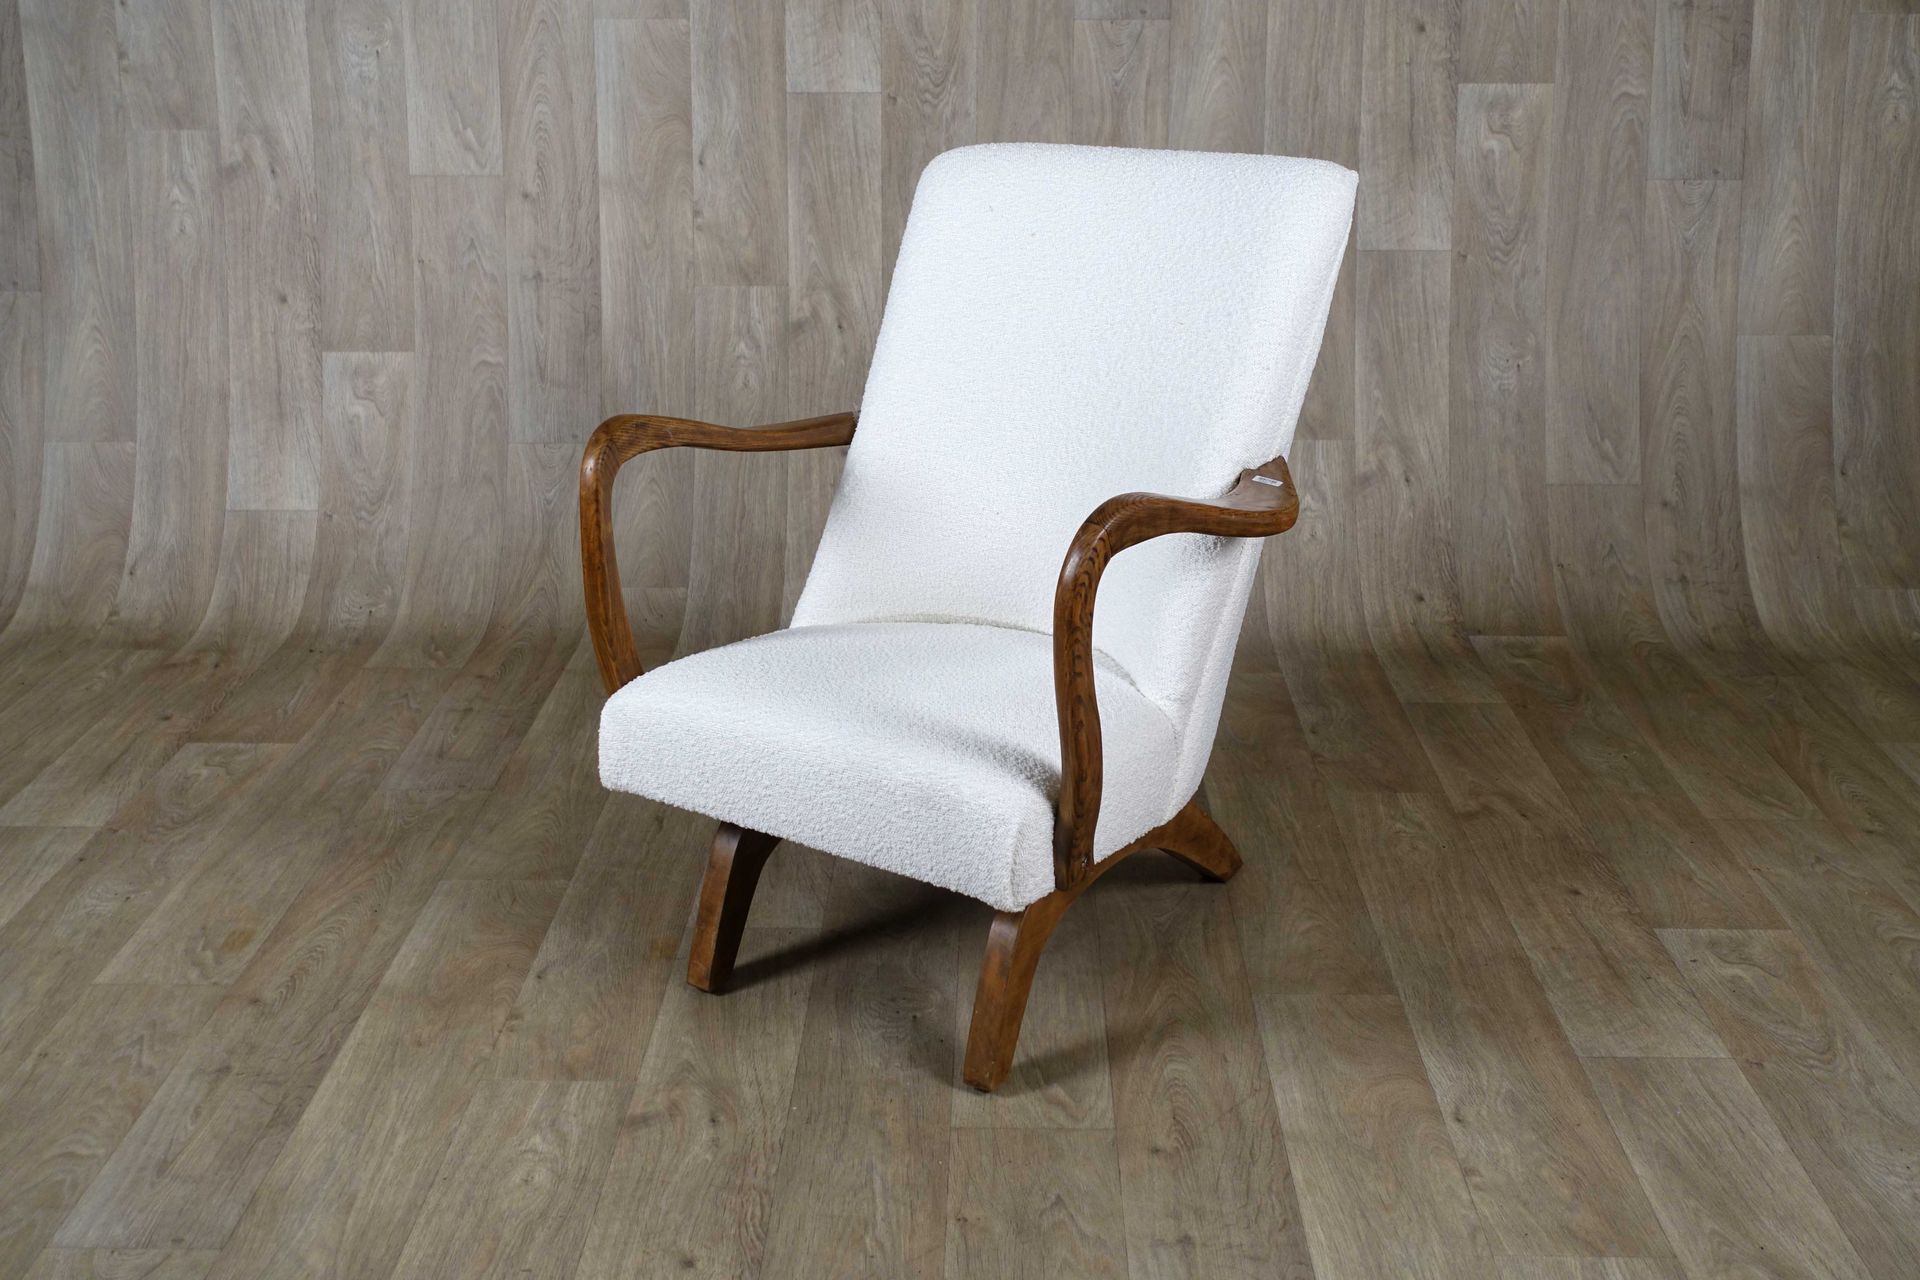 Fauteuil-berceuse. Assise inclinable et accotoirs sinueux. Pieds en accolades. O&hellip;